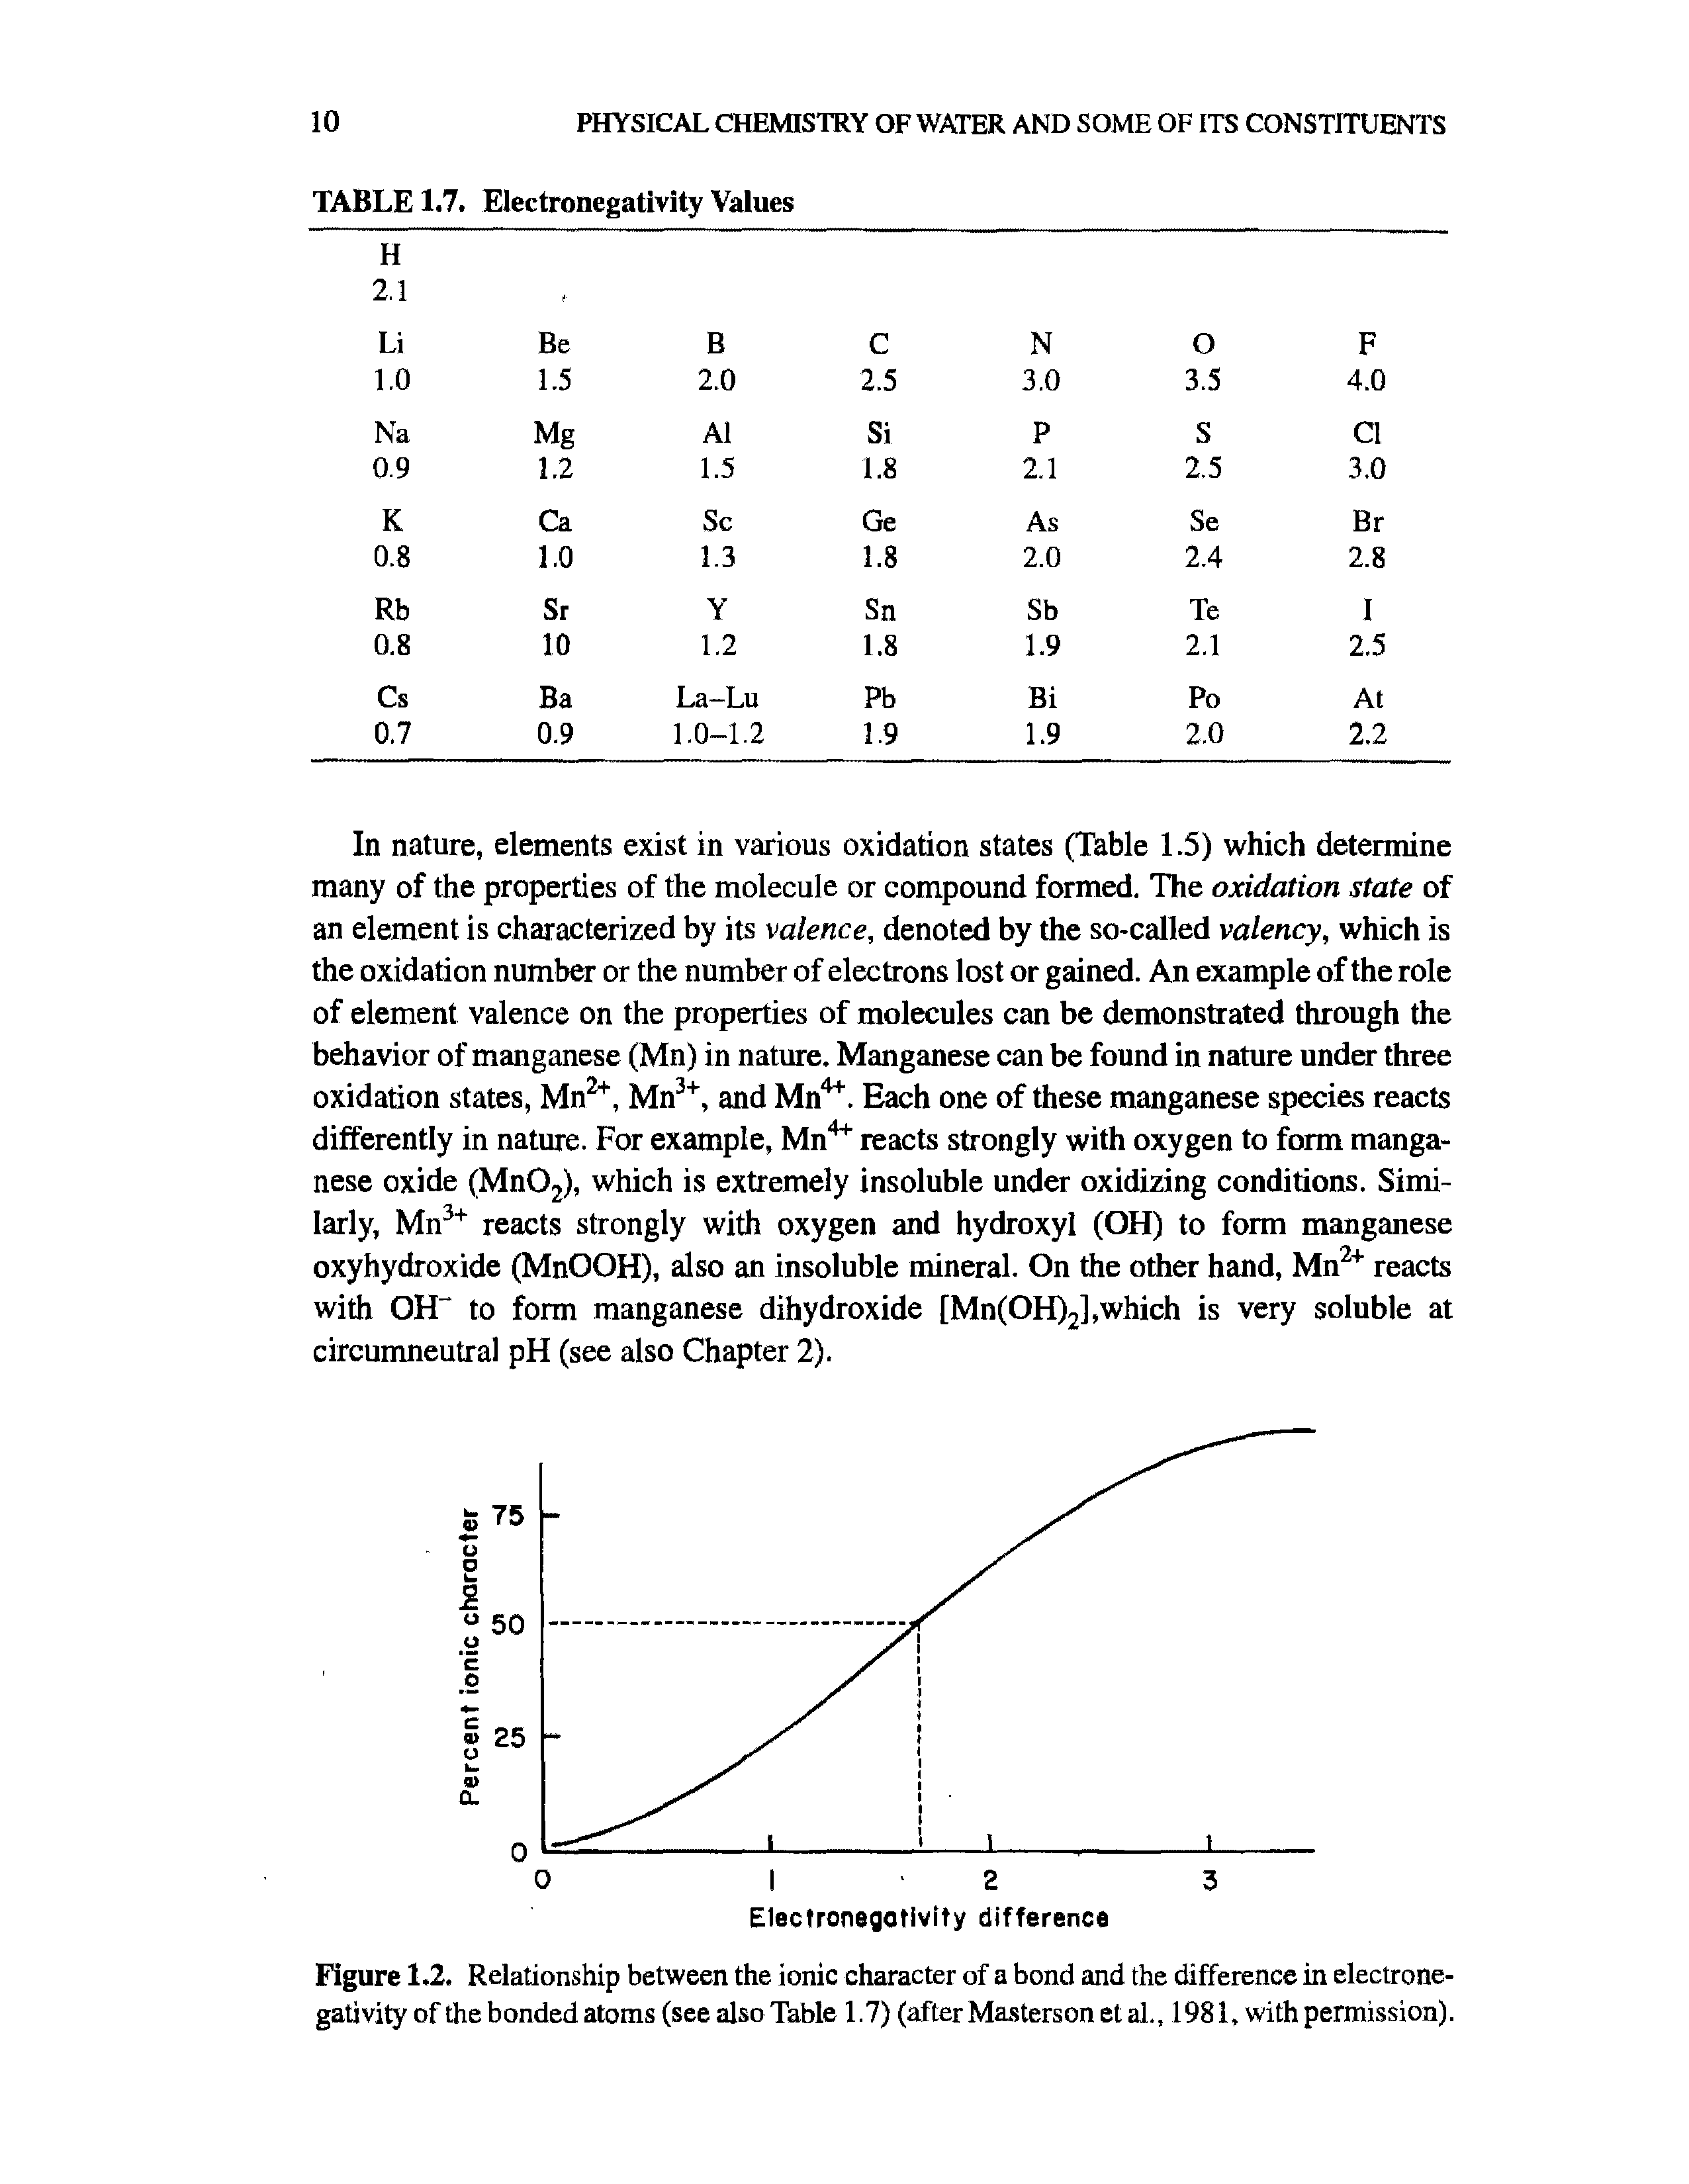 Figure 1.2. Relationship between the ionic character of a bond and the difference in electronegativity of the bonded atoms (see also Table 1.7) (after Masterson et al., 1981, with permission).